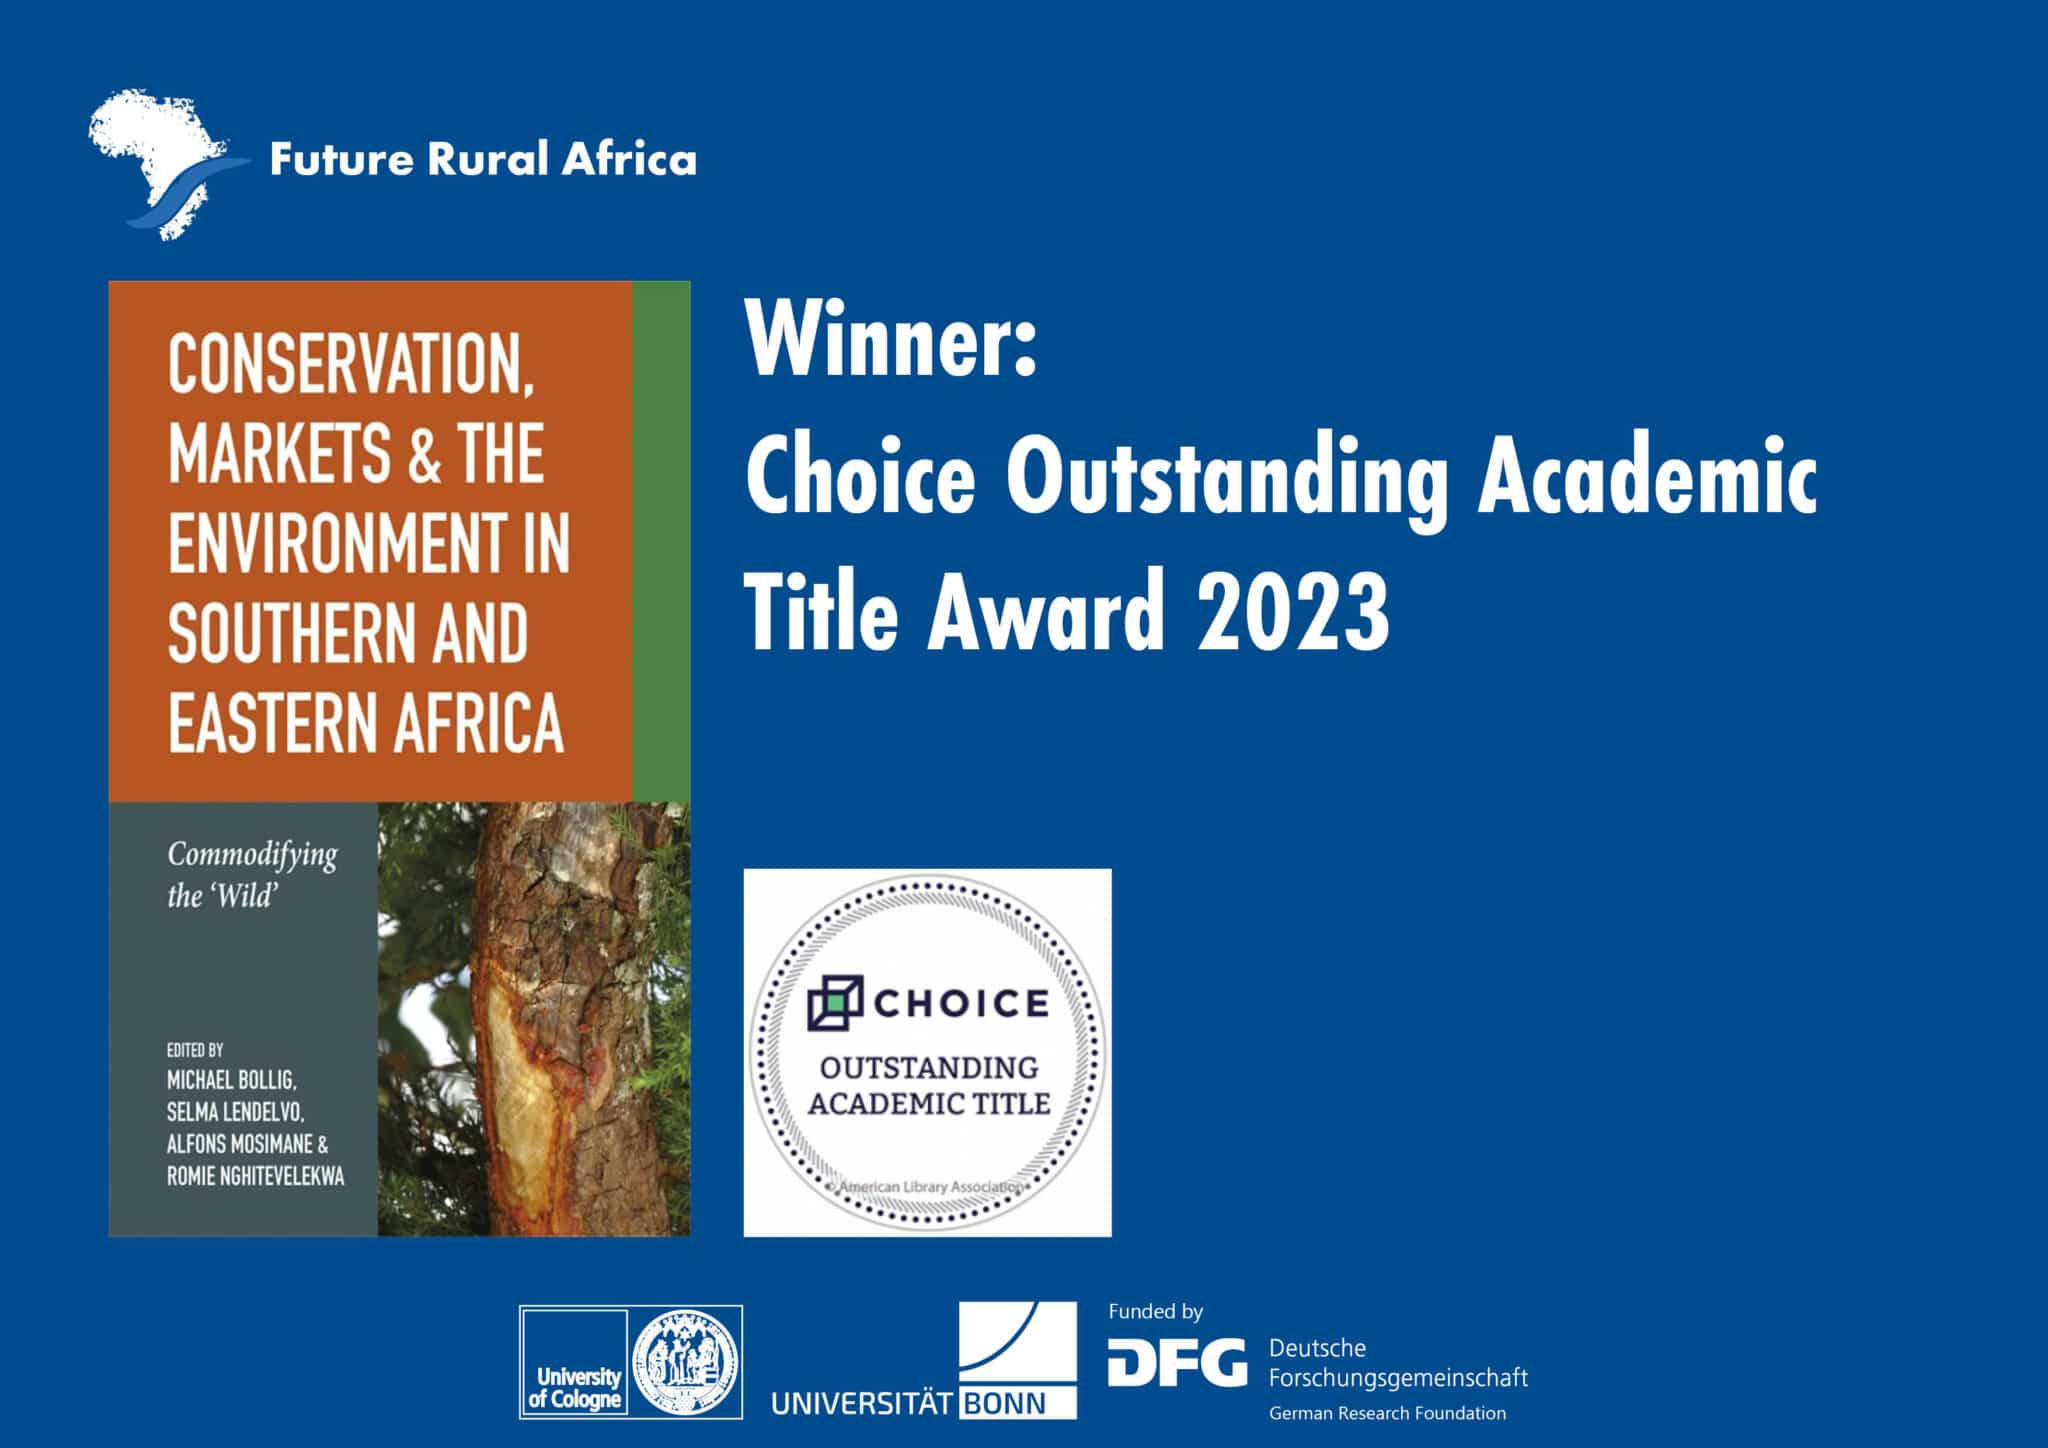 Cover image announcing the winner of the choice outstanding academic title award 2023